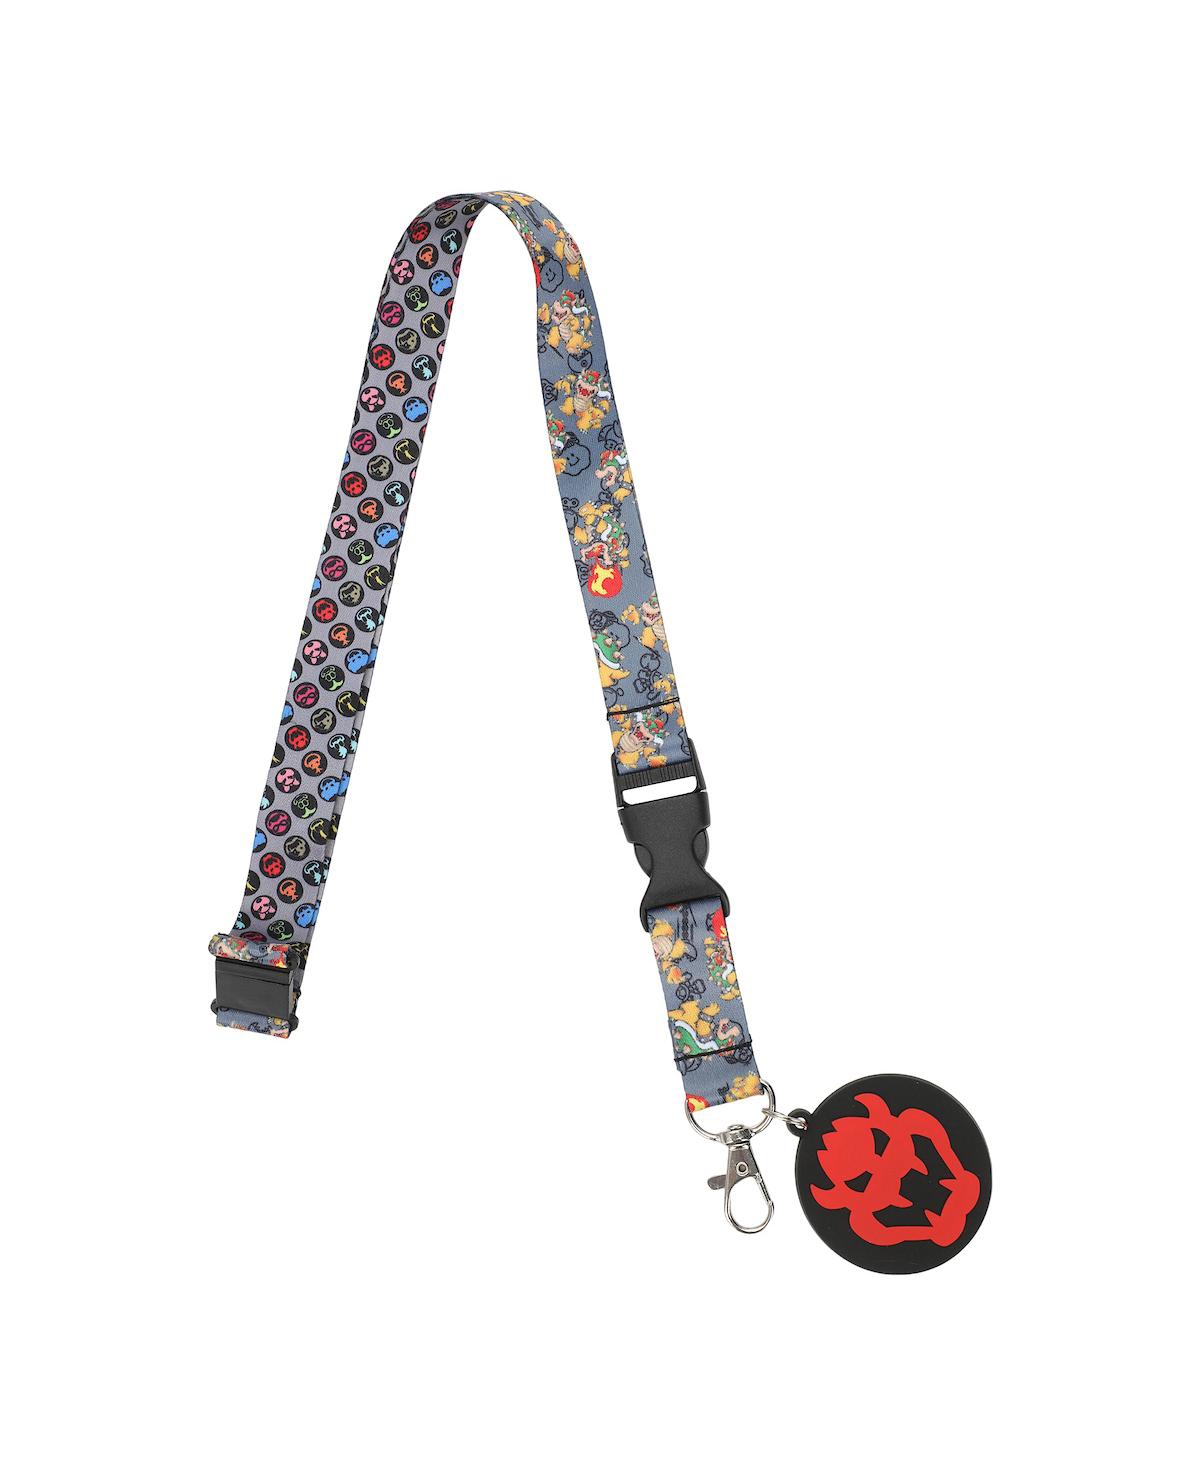 Brothers Bowser Lanyard With Metal Charm And Id Sleeve - Multicolored